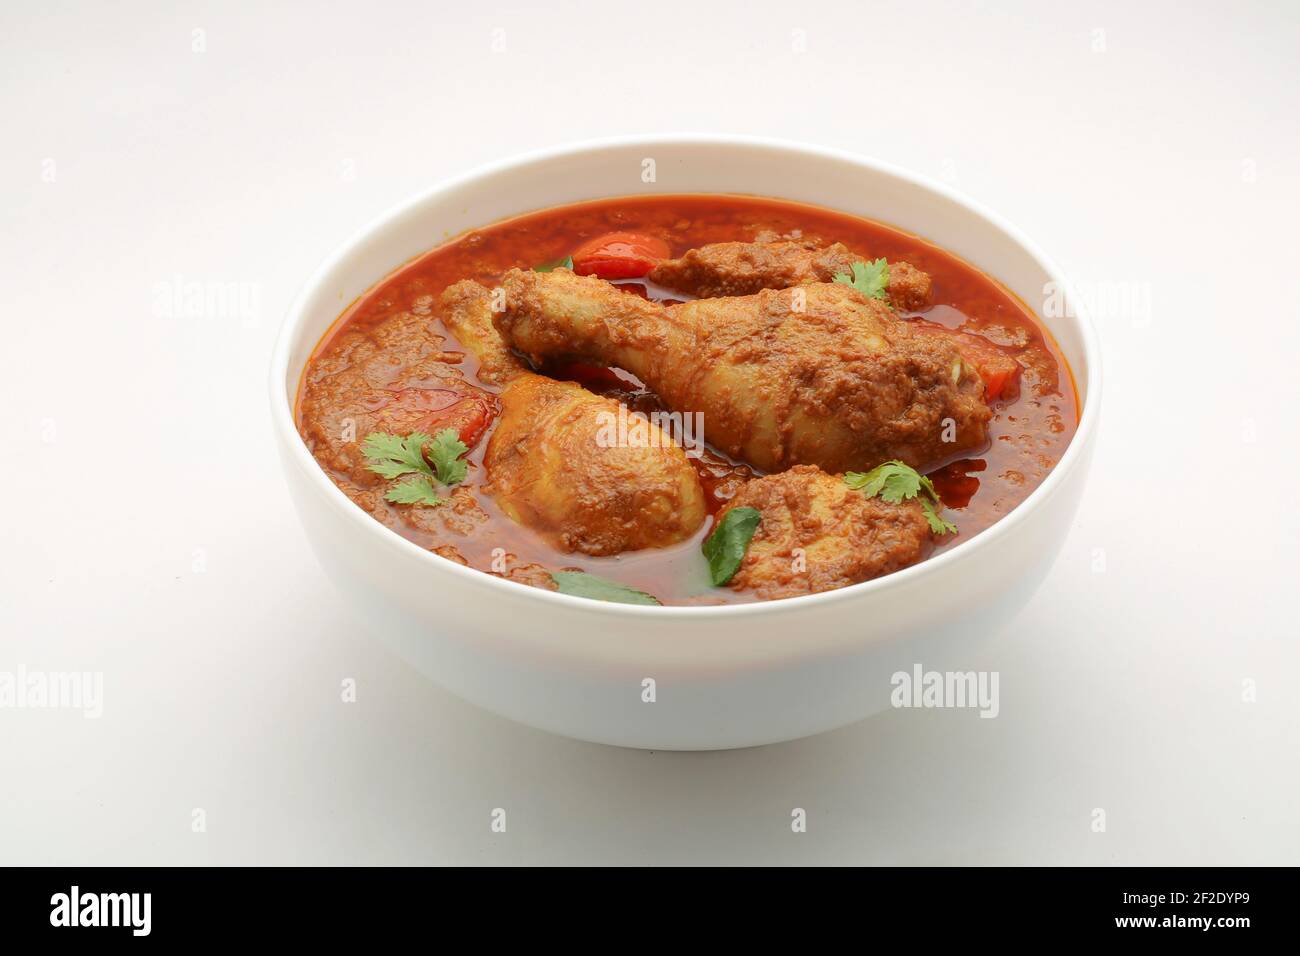 Chicken curry or masala , spicy reddish chicken leg piece dish garnished with coriander leaf and  fresh green chilli which is arranged in a white cera Stock Photo